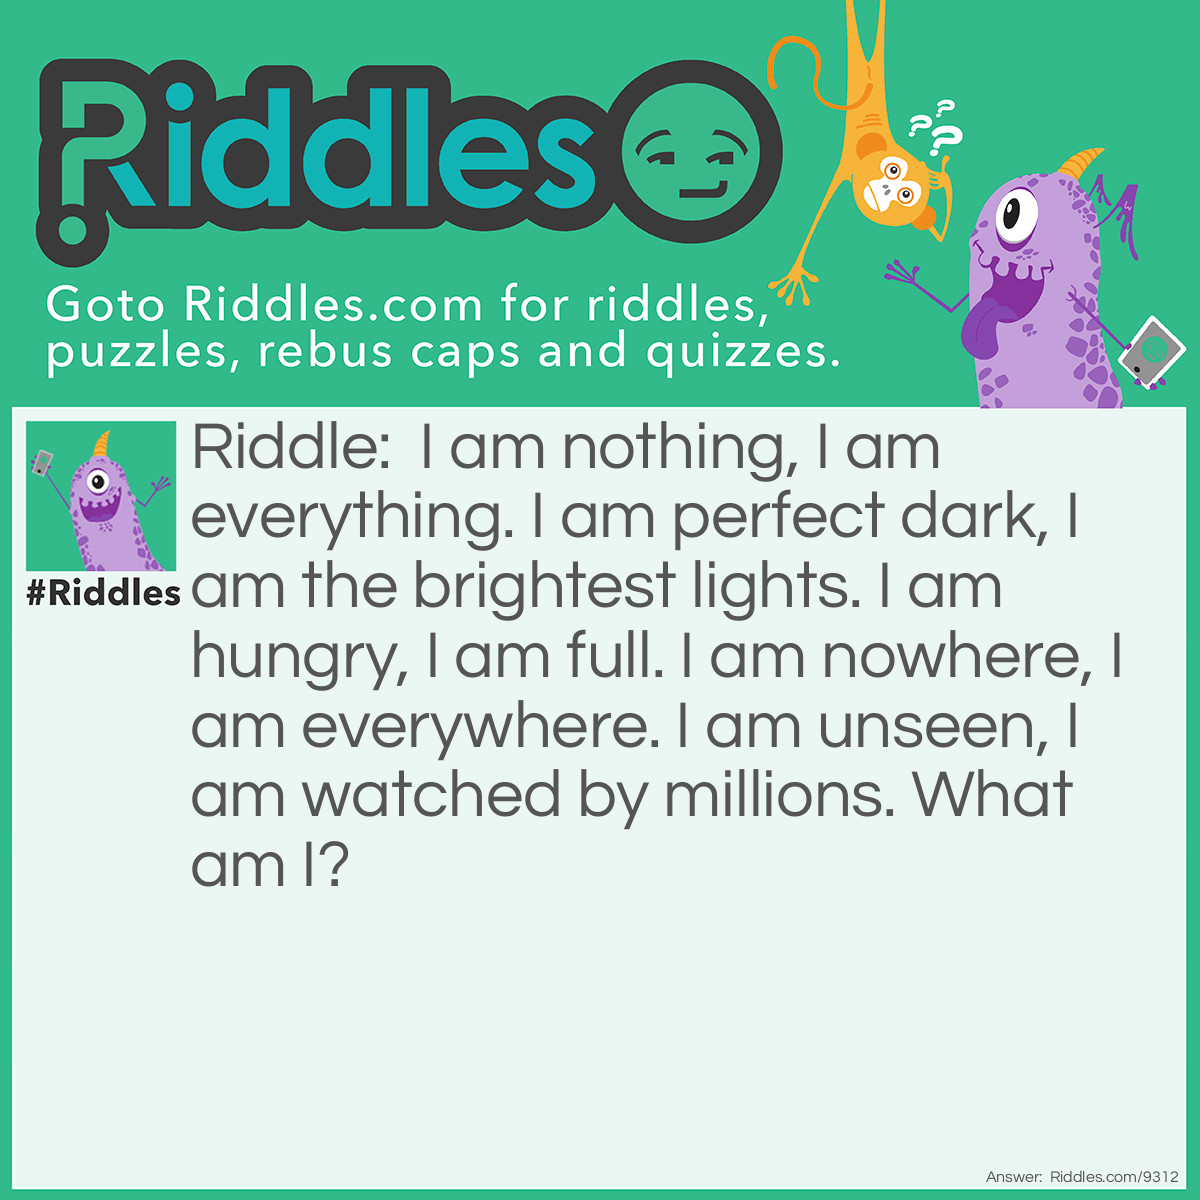 Riddle: I am nothing, I am everything. I am perfect dark, I am the brightest lights. I am hungry, I am full. I am nowhere, I am everywhere. I am unseen, I am watched by millions. What am I? Answer: The universe.